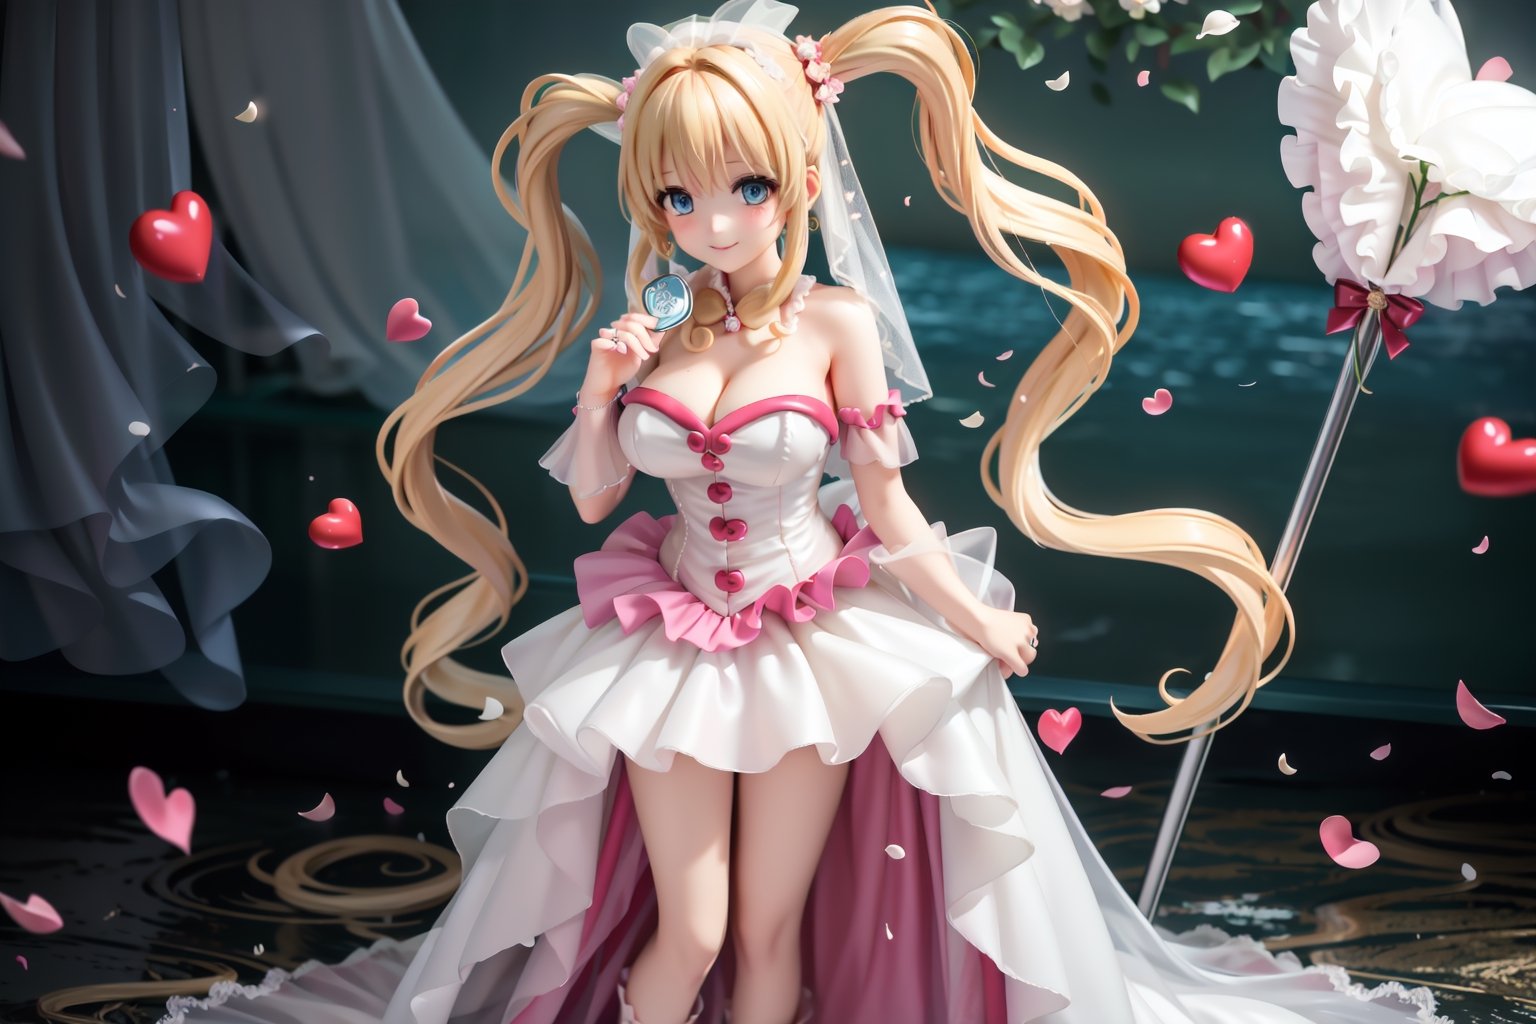 ((She wears revealing pink frilled weeding dress, Wedding gown (veil), blond very long hair, Heart-shaped twintails, large breasts 2.0)), cute pose, large breasts, cleavage , blue eyes, (Masterpiece), full body shot, best quality, high resolution, highly detailed, detailed background, movie lighting, 1girl, idol, underbust, stage, stage lights, music, blush, sweet smile, sweat, concert, ruffles, confetti, hearts, hair accessories, hair bows, gems, jewelry, neon lights , bow tie , pointing, spotlight, sparkles, light particles, frame breasts, cross lace, white stockings,ryuubi,lift skirt,1girl,seethrough_wedding_dress,seethrough_china_dress, red and gold dress,Angel,spartanarmor,red cape,long hair,hmnl,fr4ctal4rmor,office_lady_uniform,reiko_aiwaifu,QIPAO,qipao,enome_futokunoguild,ｍenesu,crystallized_dress,ruanyi0261,floral dress, twintails